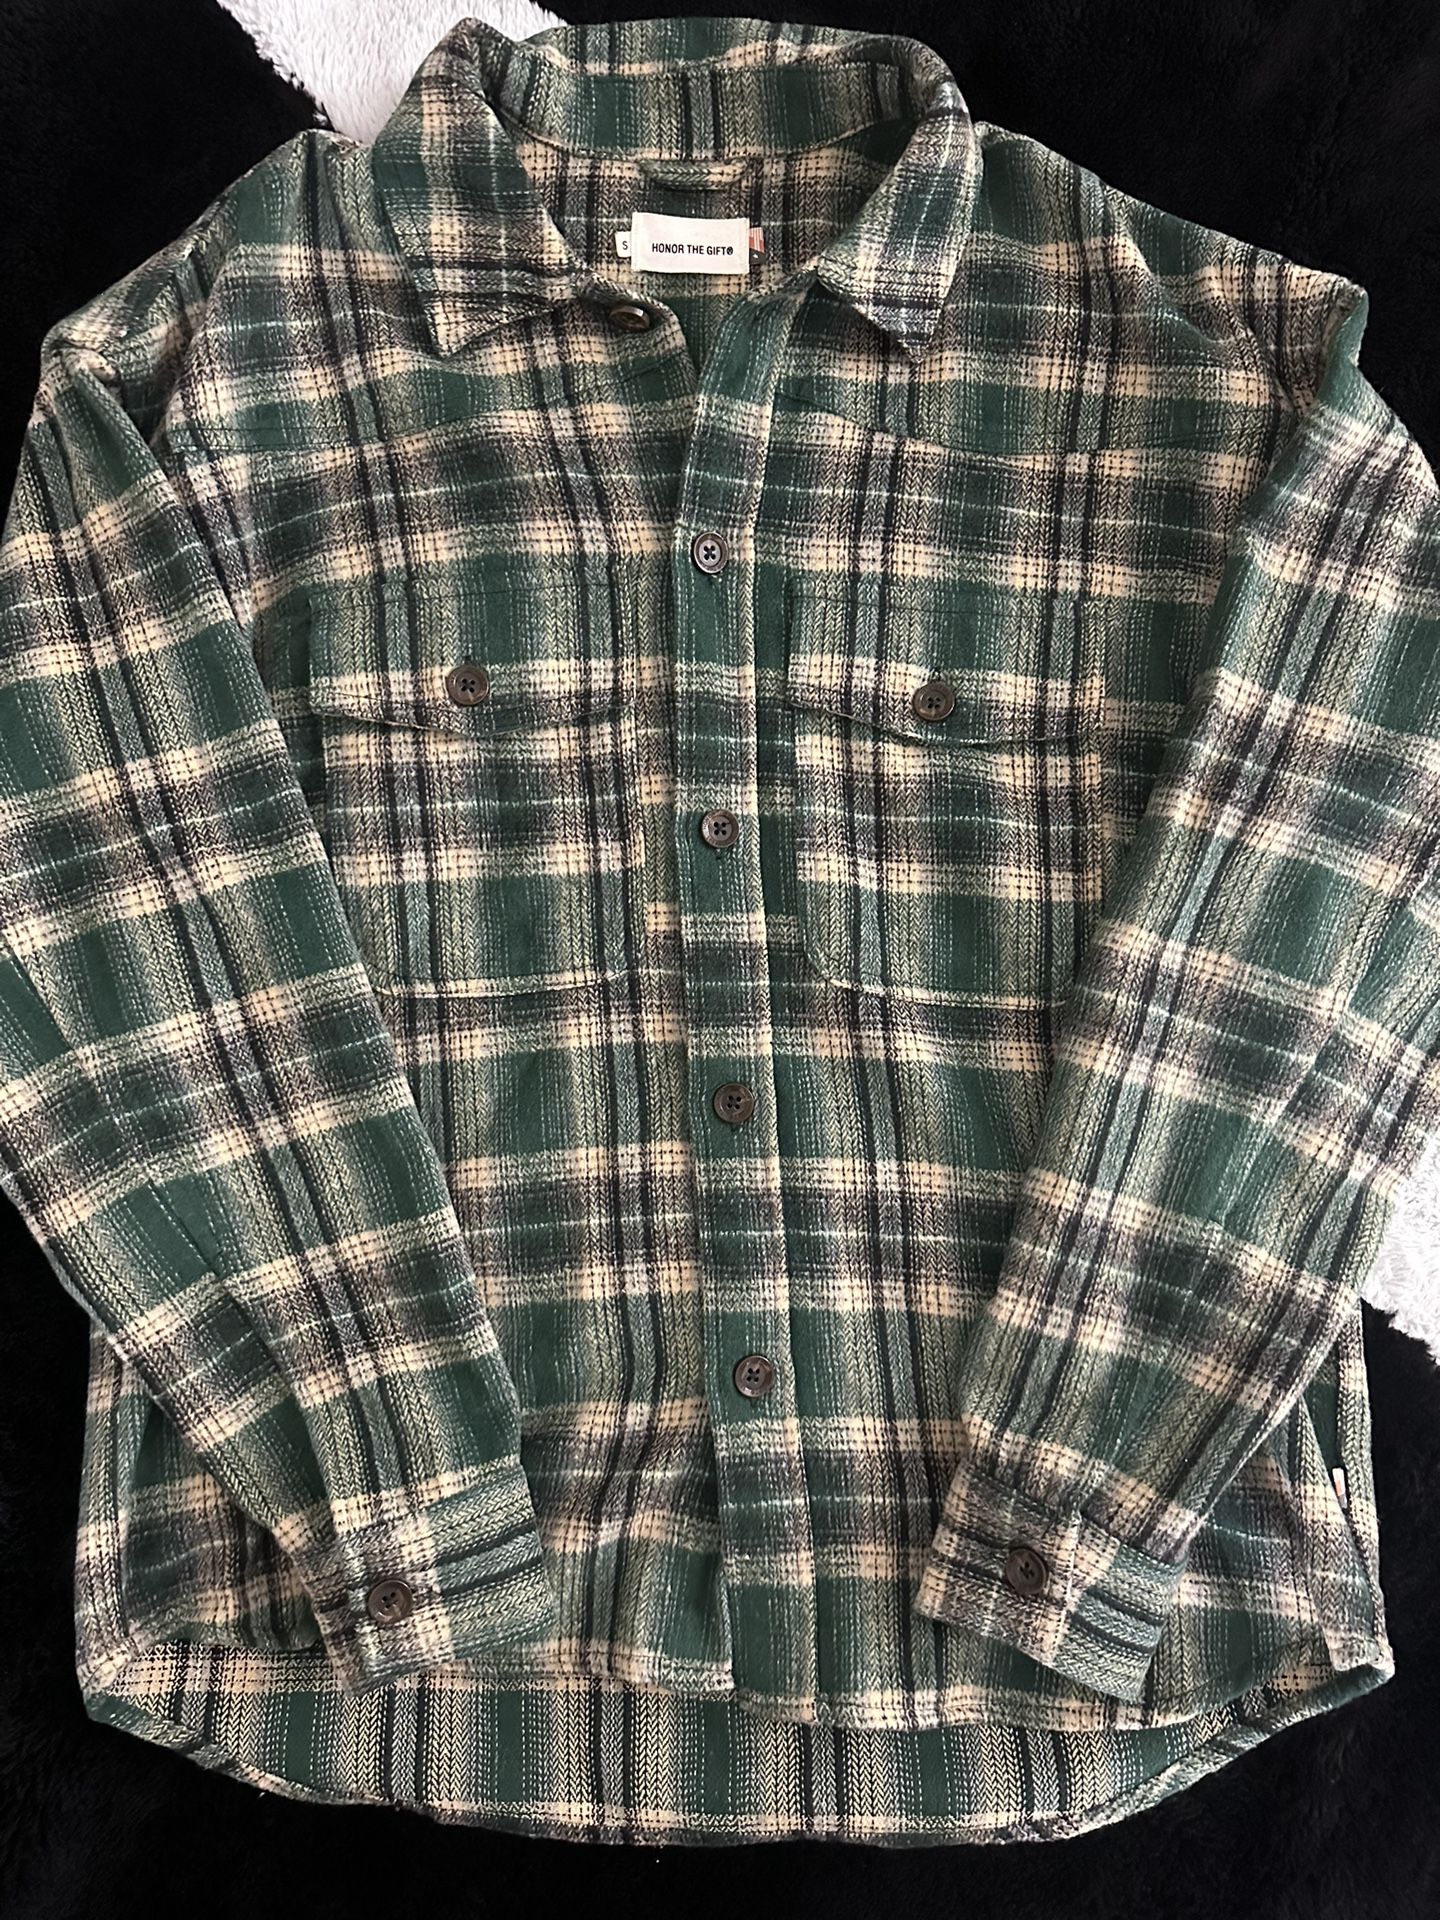 Honor the gift Flannel